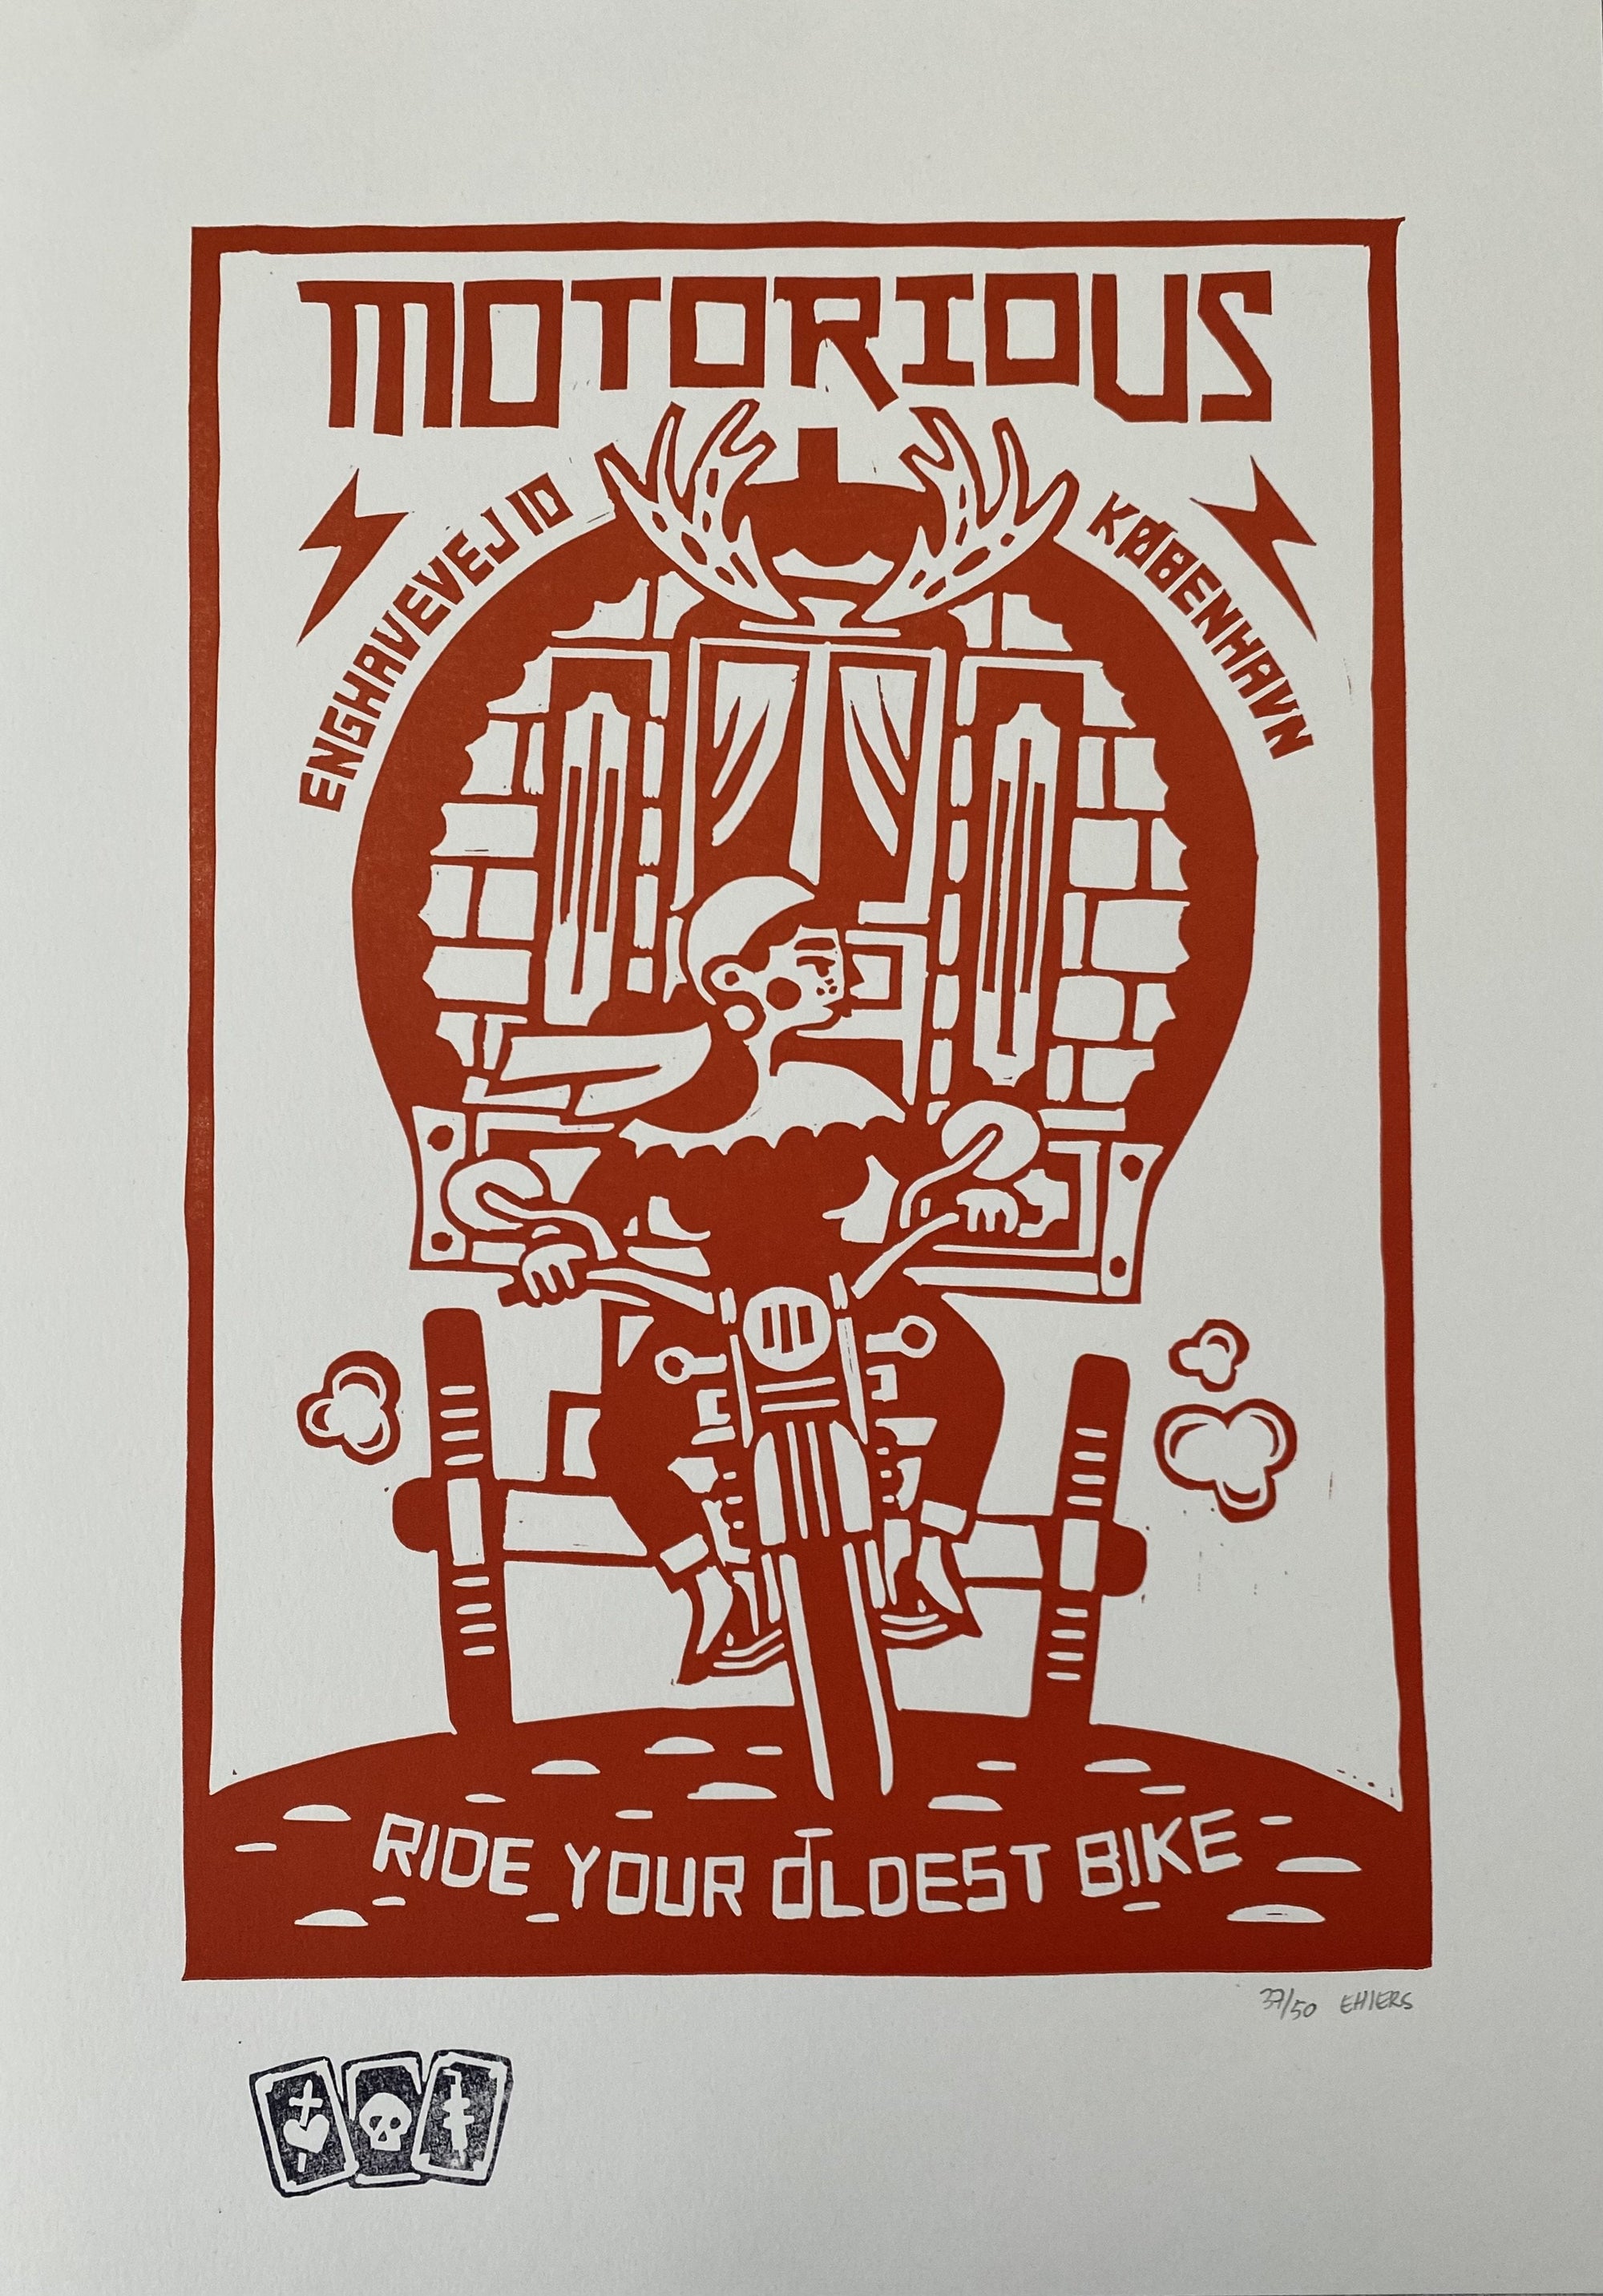 2017 Motorious lino-cut by Mette Ehlers, A3 oversize, Red-Linoleumstryk og Plakater-Motorious Copenhagen-Motorious Copenhagen